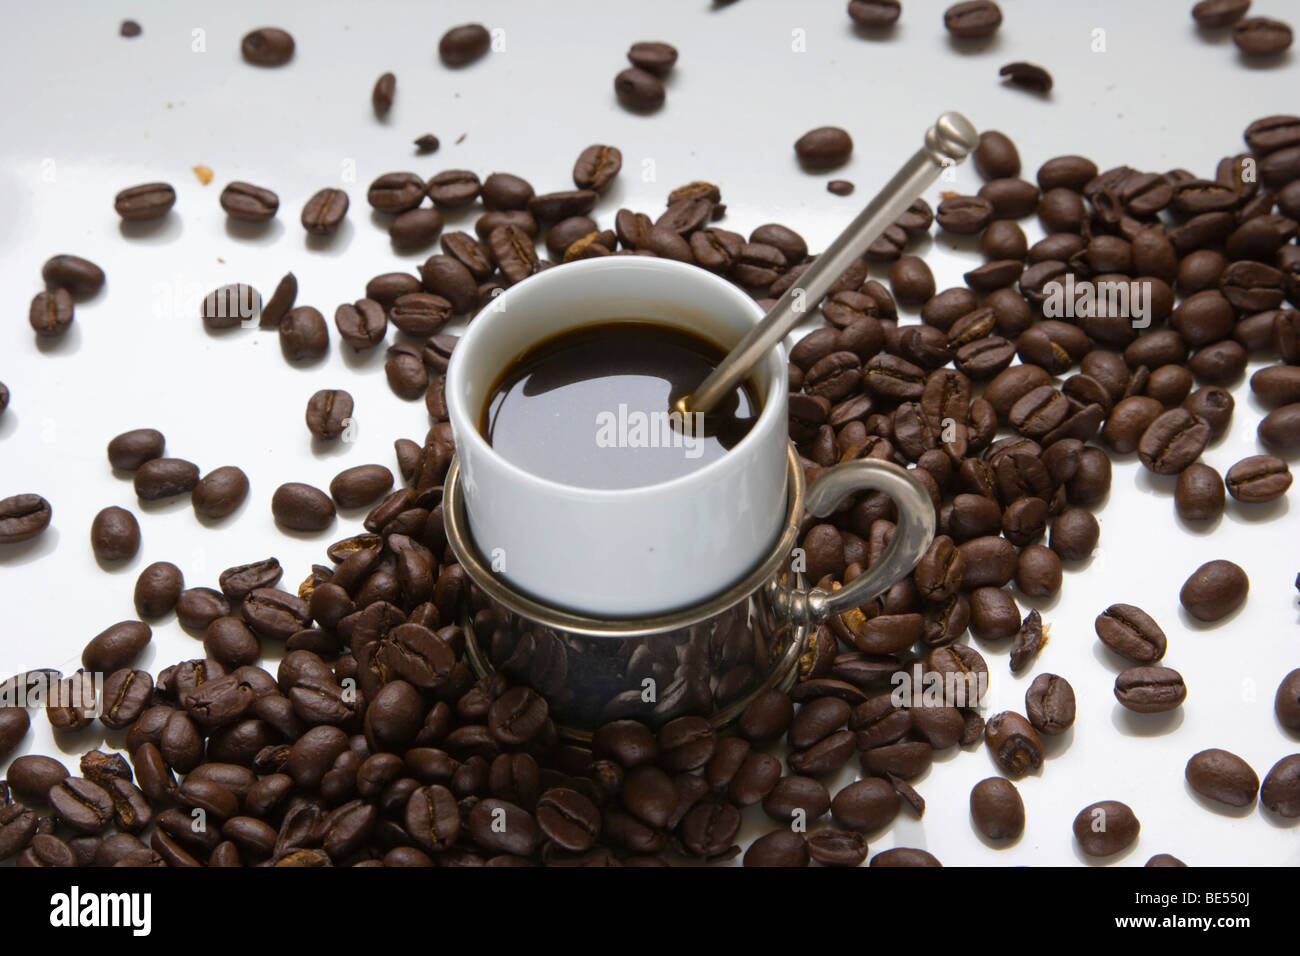 Cup of coffee and coffee beans Stock Photo